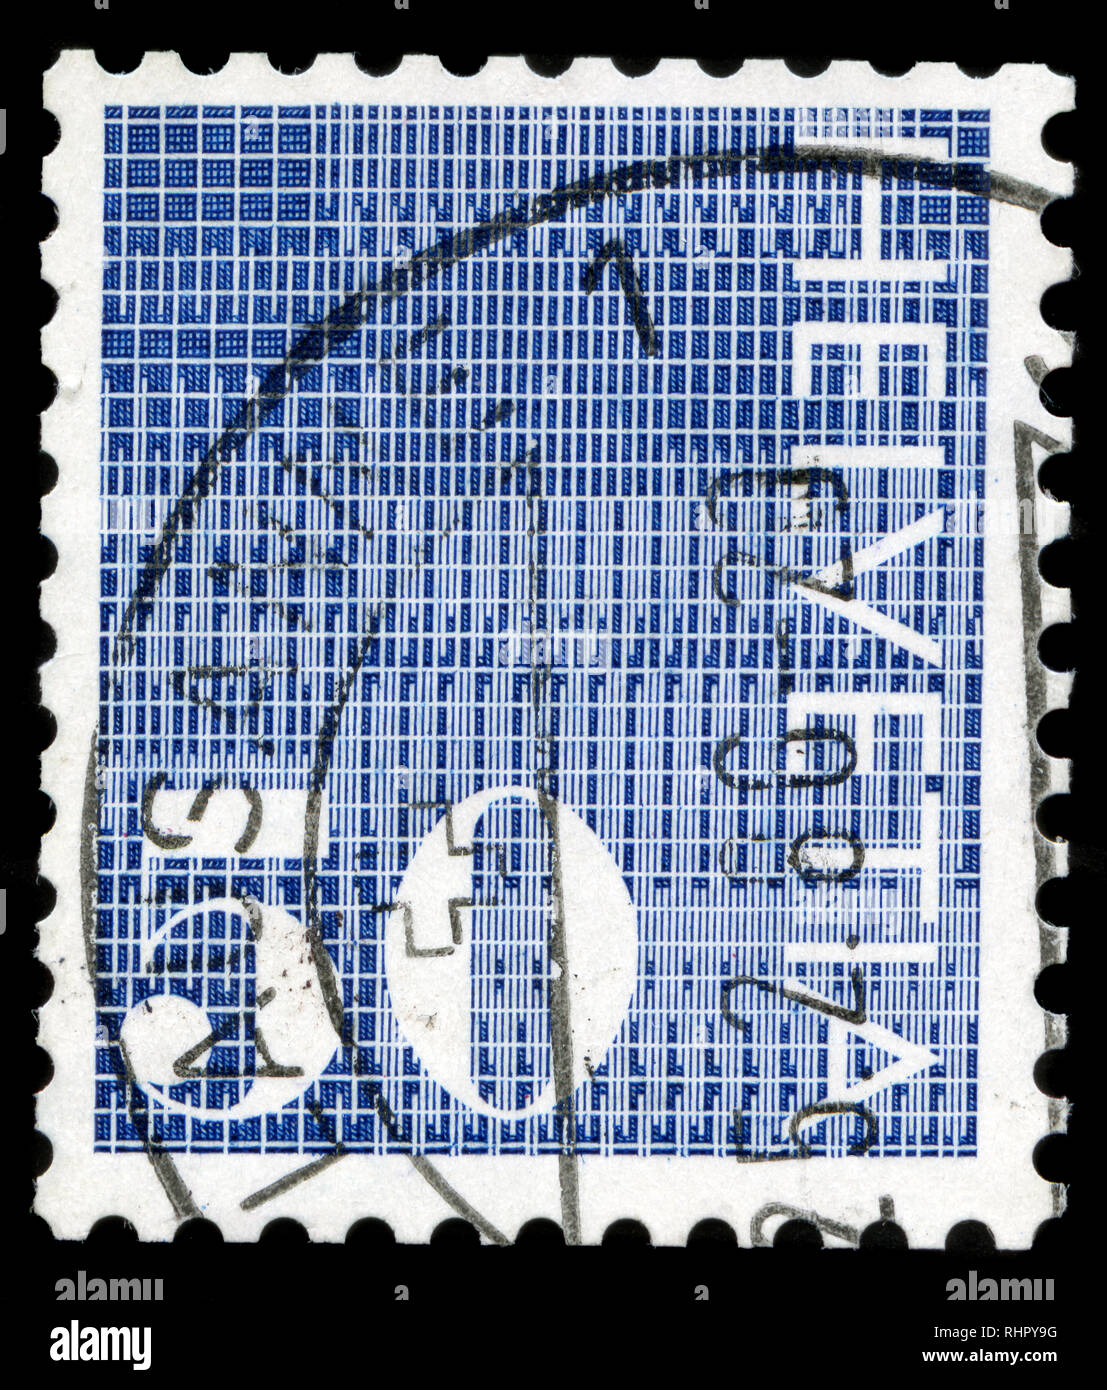 Postage stamp from Switzerland in the Numeral series issued in 1970 Stock Photo